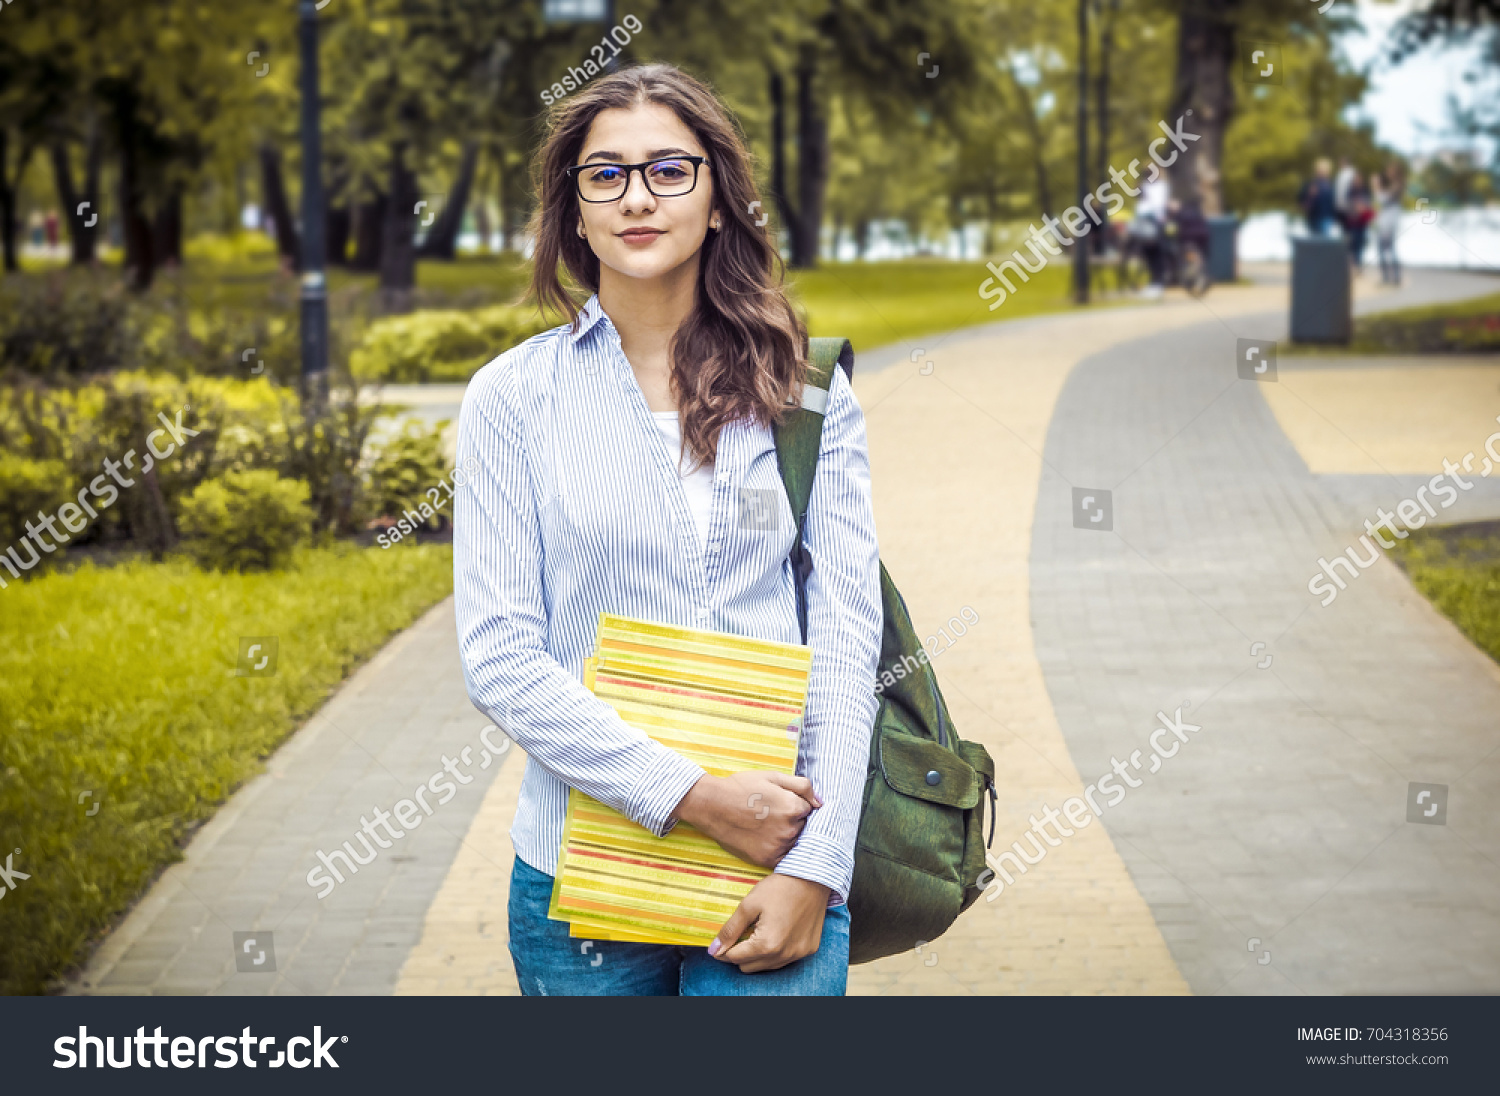 Attractive girl in the park. Indian woman in glasses with books #704318356